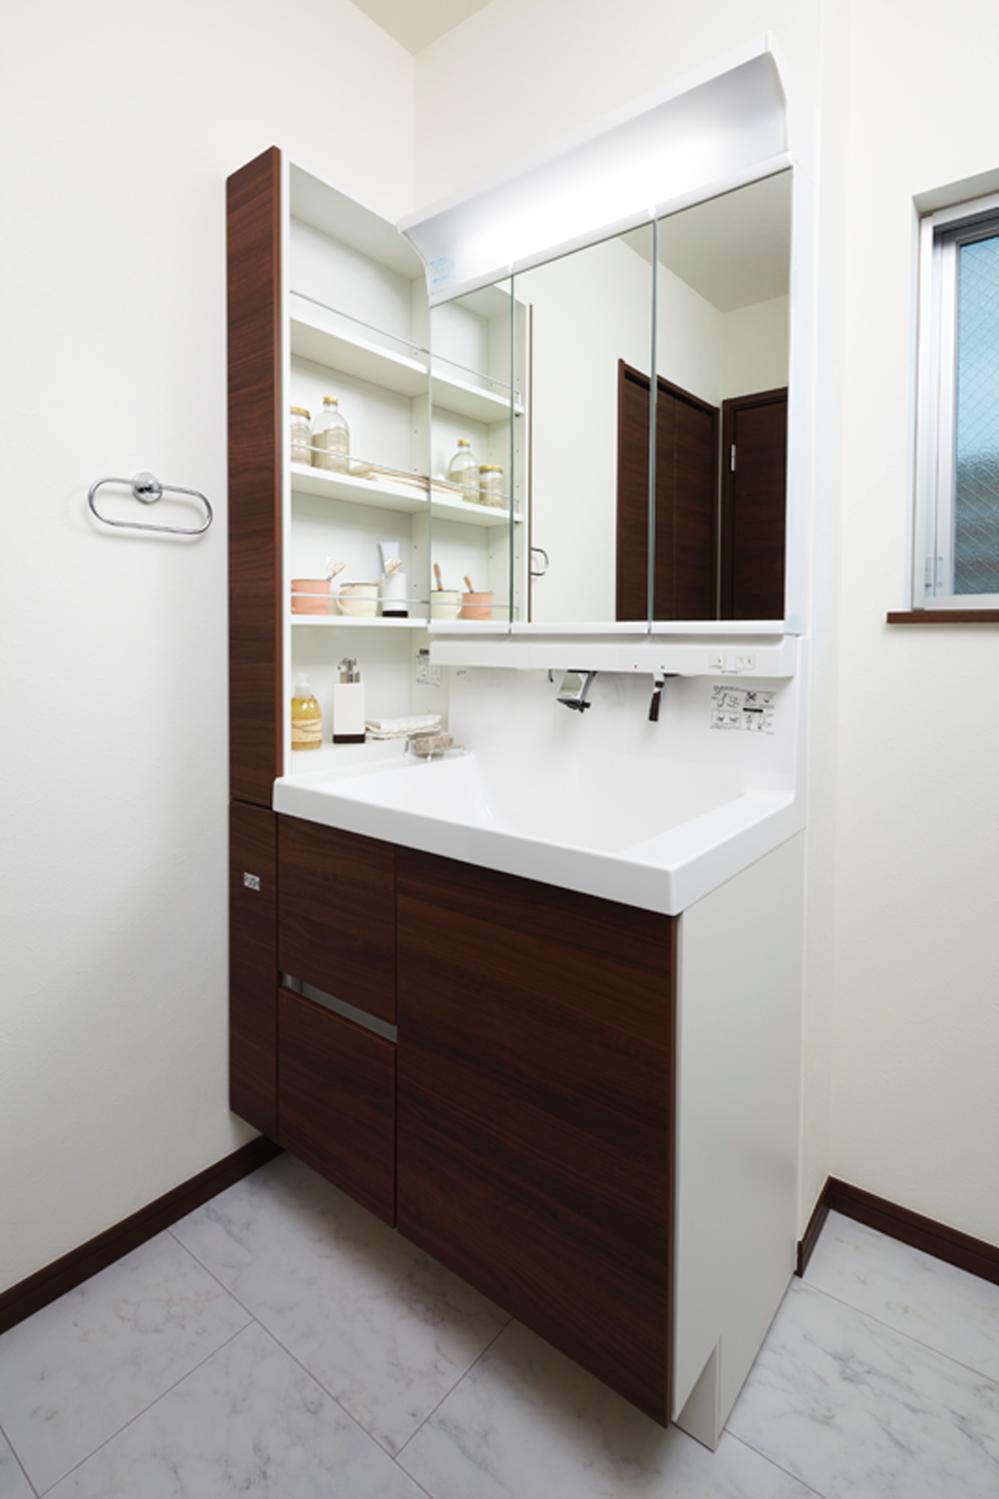 Wash basin, toilet. Standard equipped with a tall cabinet in vanity with a three-sided mirror. Not troubled in the storage capacity space. Building 2 selling local (2013 February shooting)